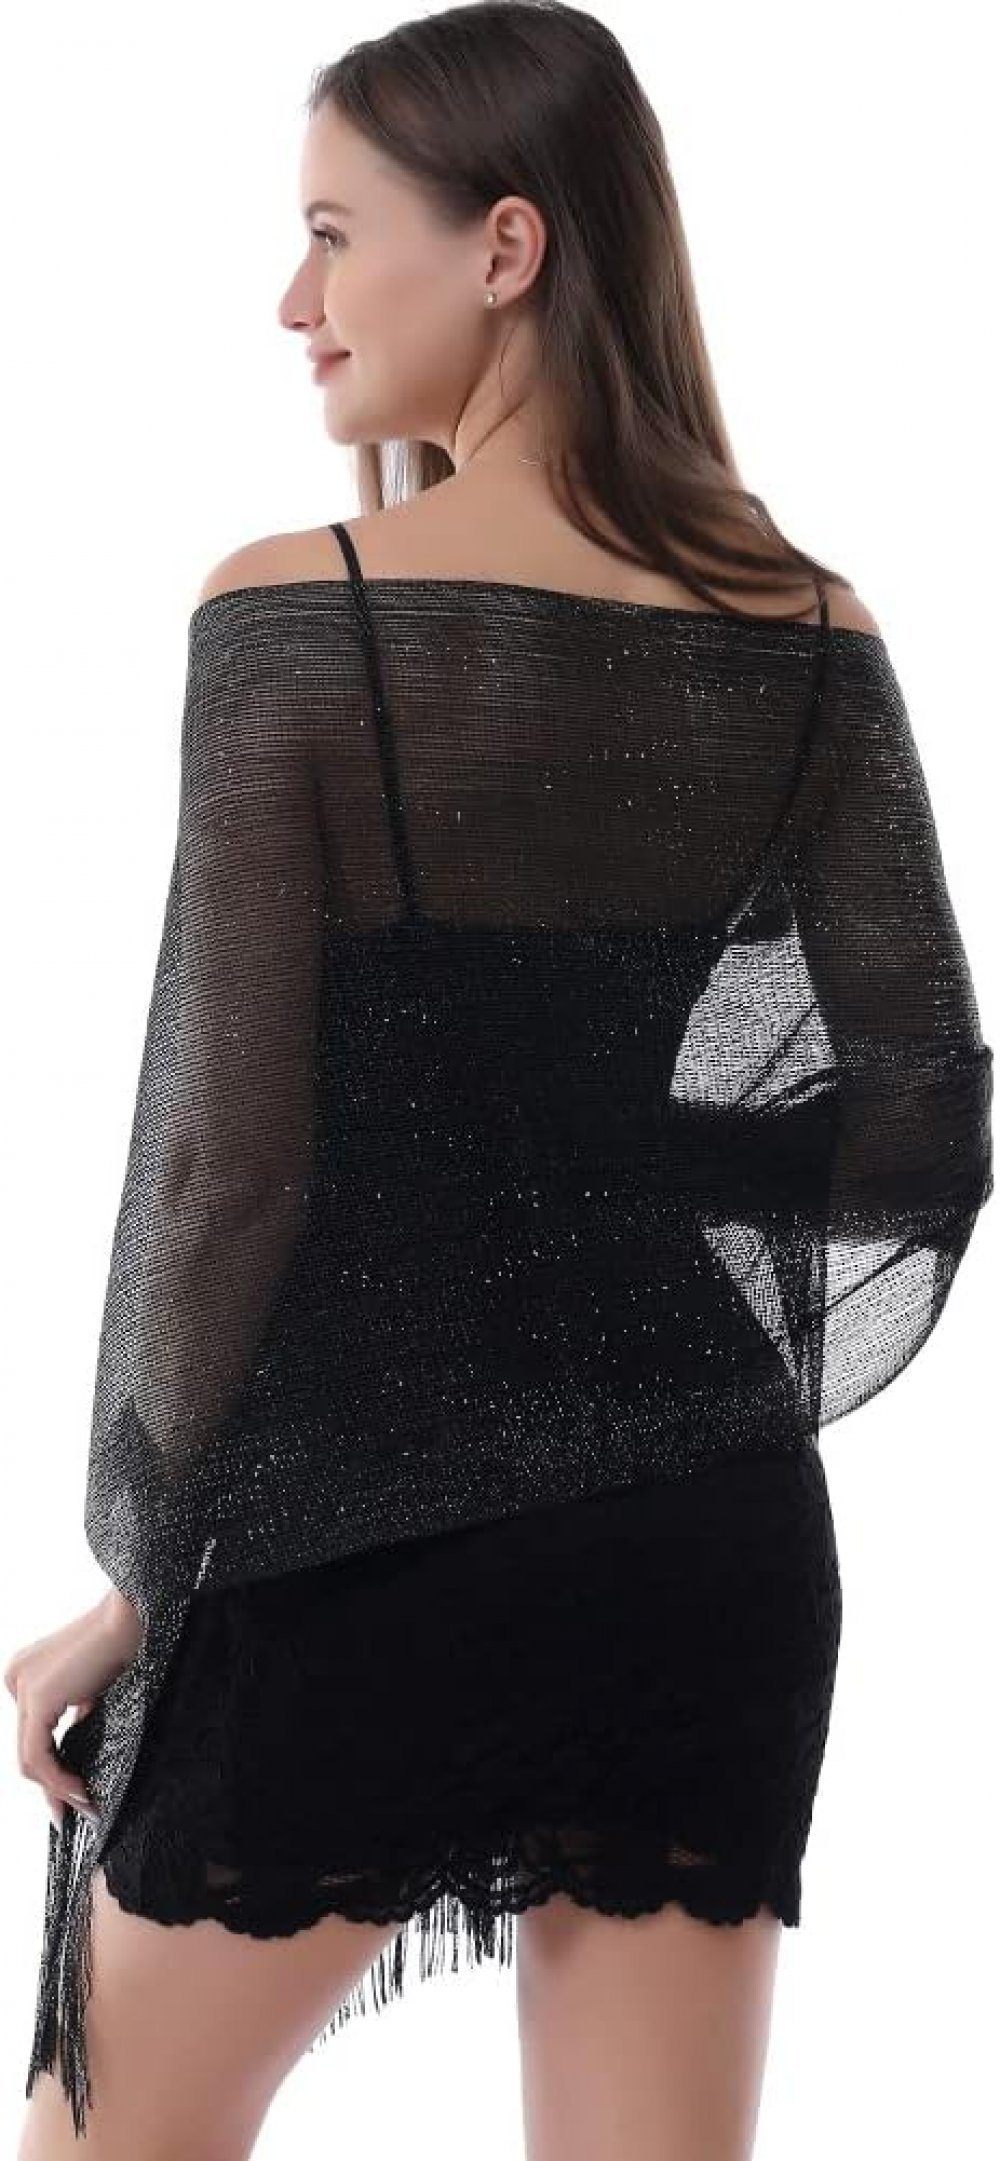 parties suitable shawl evening buckle Holiday metal Schal sparkling for schwarz WaKuKa